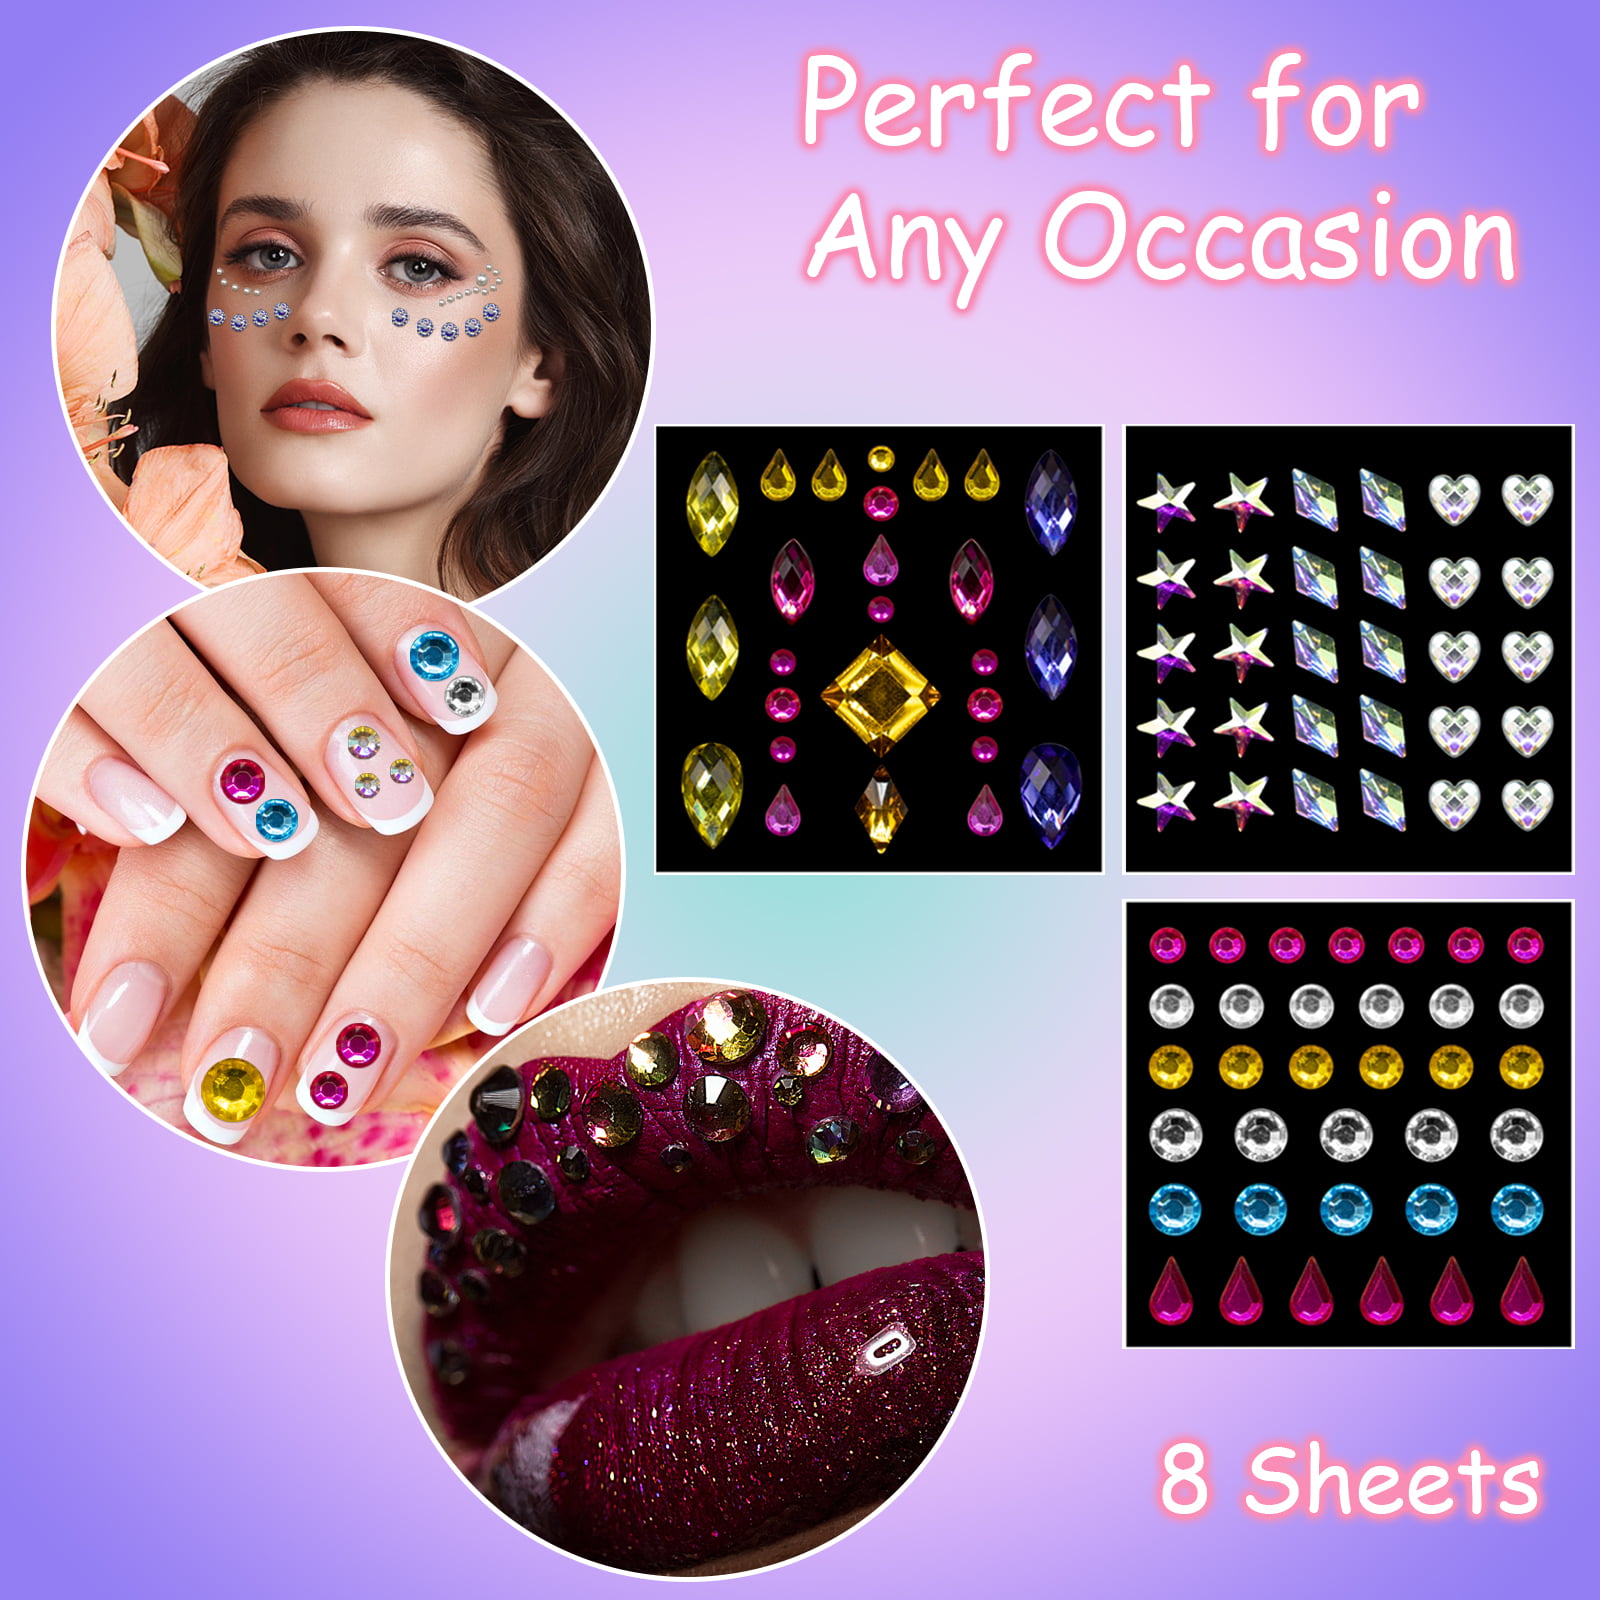 TOYANDONA 400 Pcs Crystal Gemstone Stickers Craft Jewelry Crystal Body  Rhinestones Stickers Various Shapes Craft Jewels Nail Stickers for Kids  Face